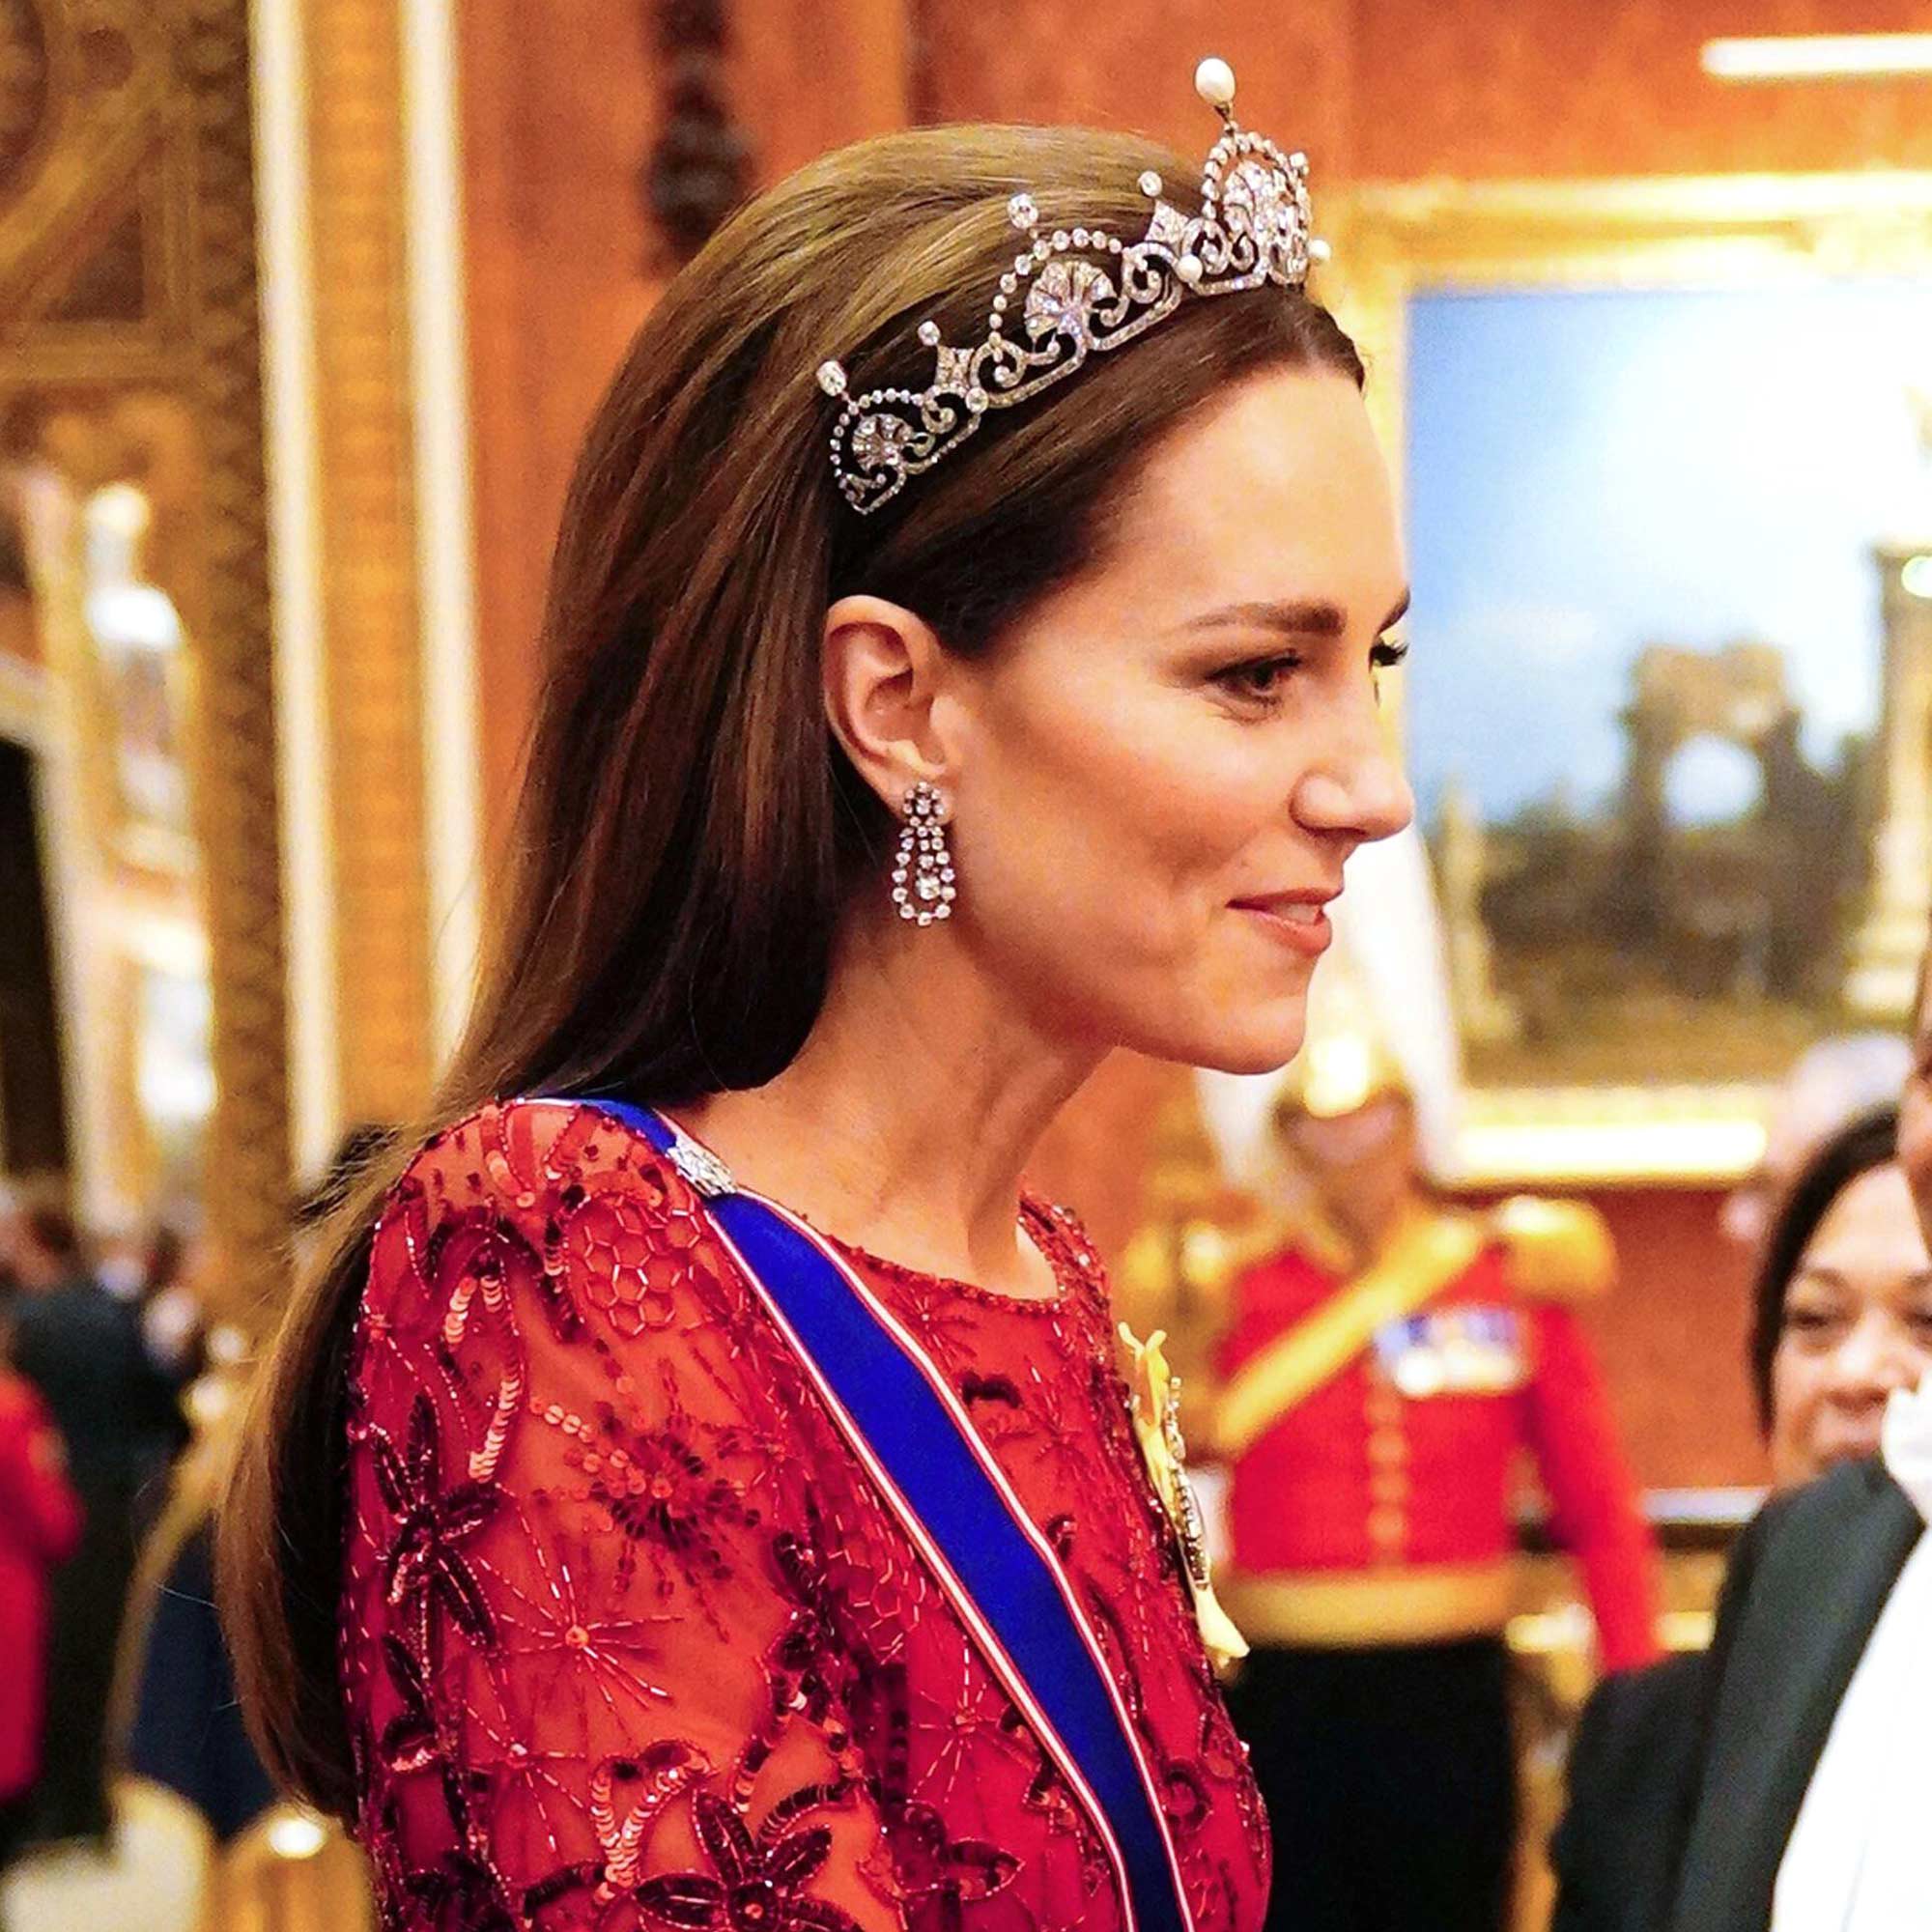 Kate Middleton The Princess of Wales wore the Lotus Flower Tiara made by Garrard during a Diplomatic Corps reception at Buckingham Palace in London square